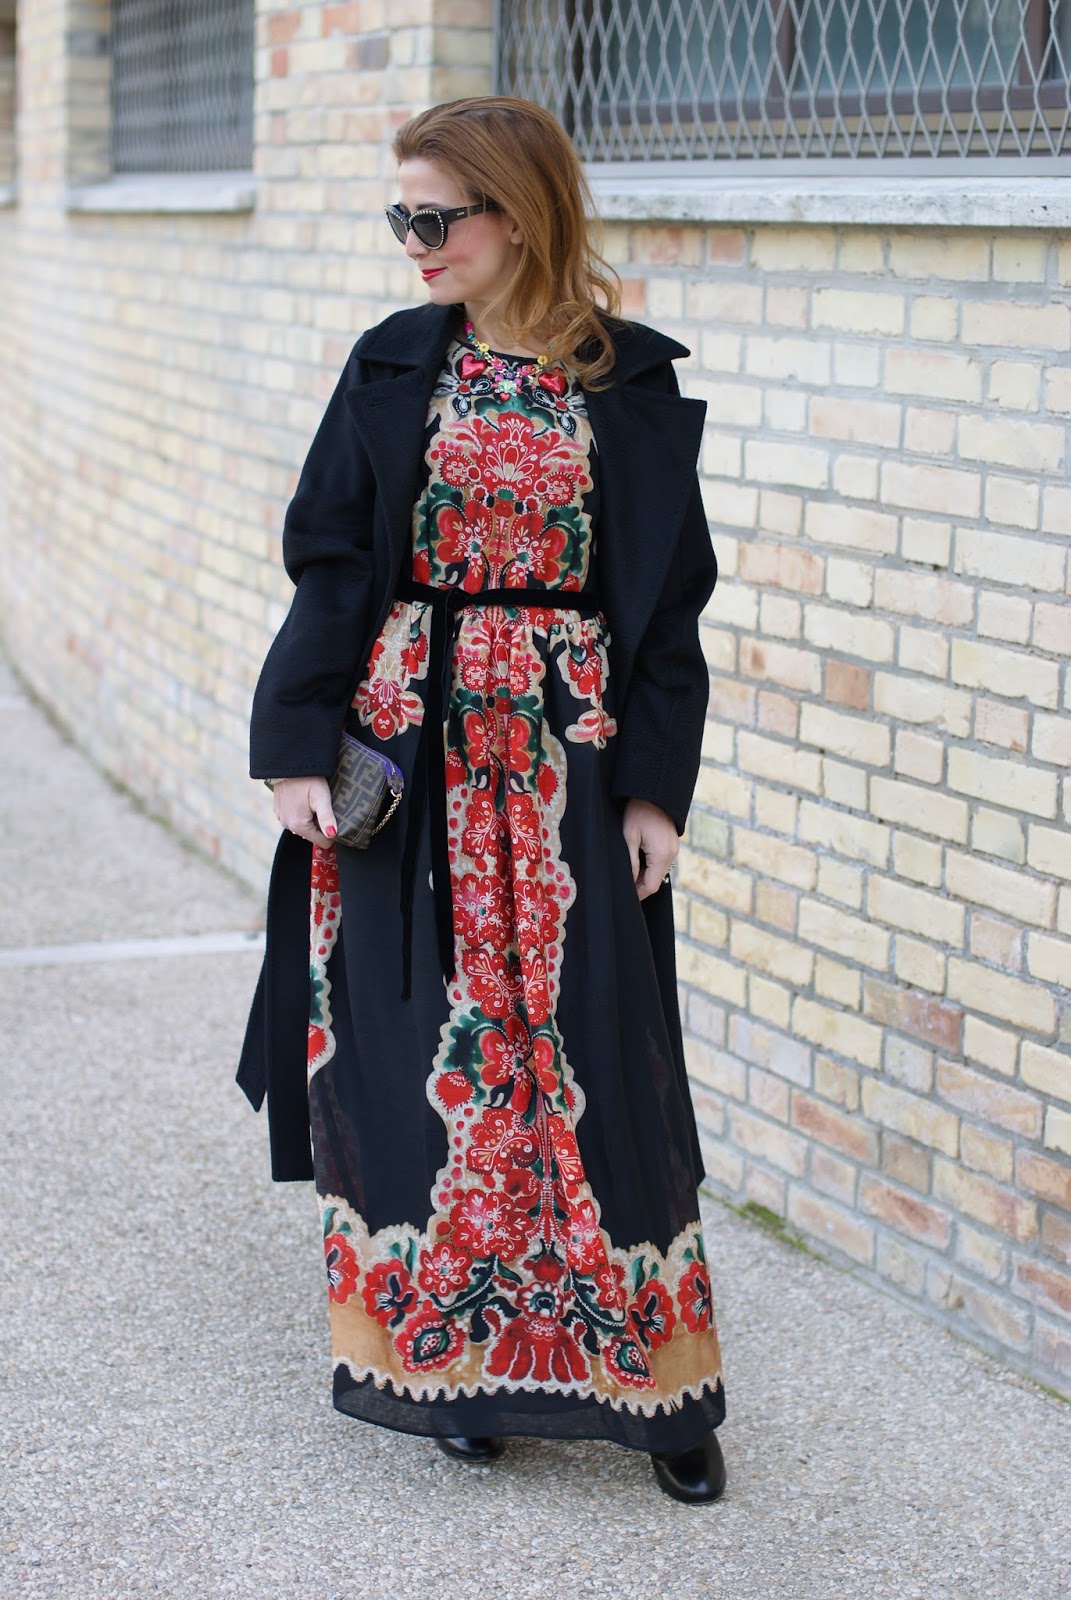 Max Mara Manuela camel coat, Red Valentino floral dress and Fendi Zucca clutch on Fashion and Cookies fashion blog, fashion blogger style